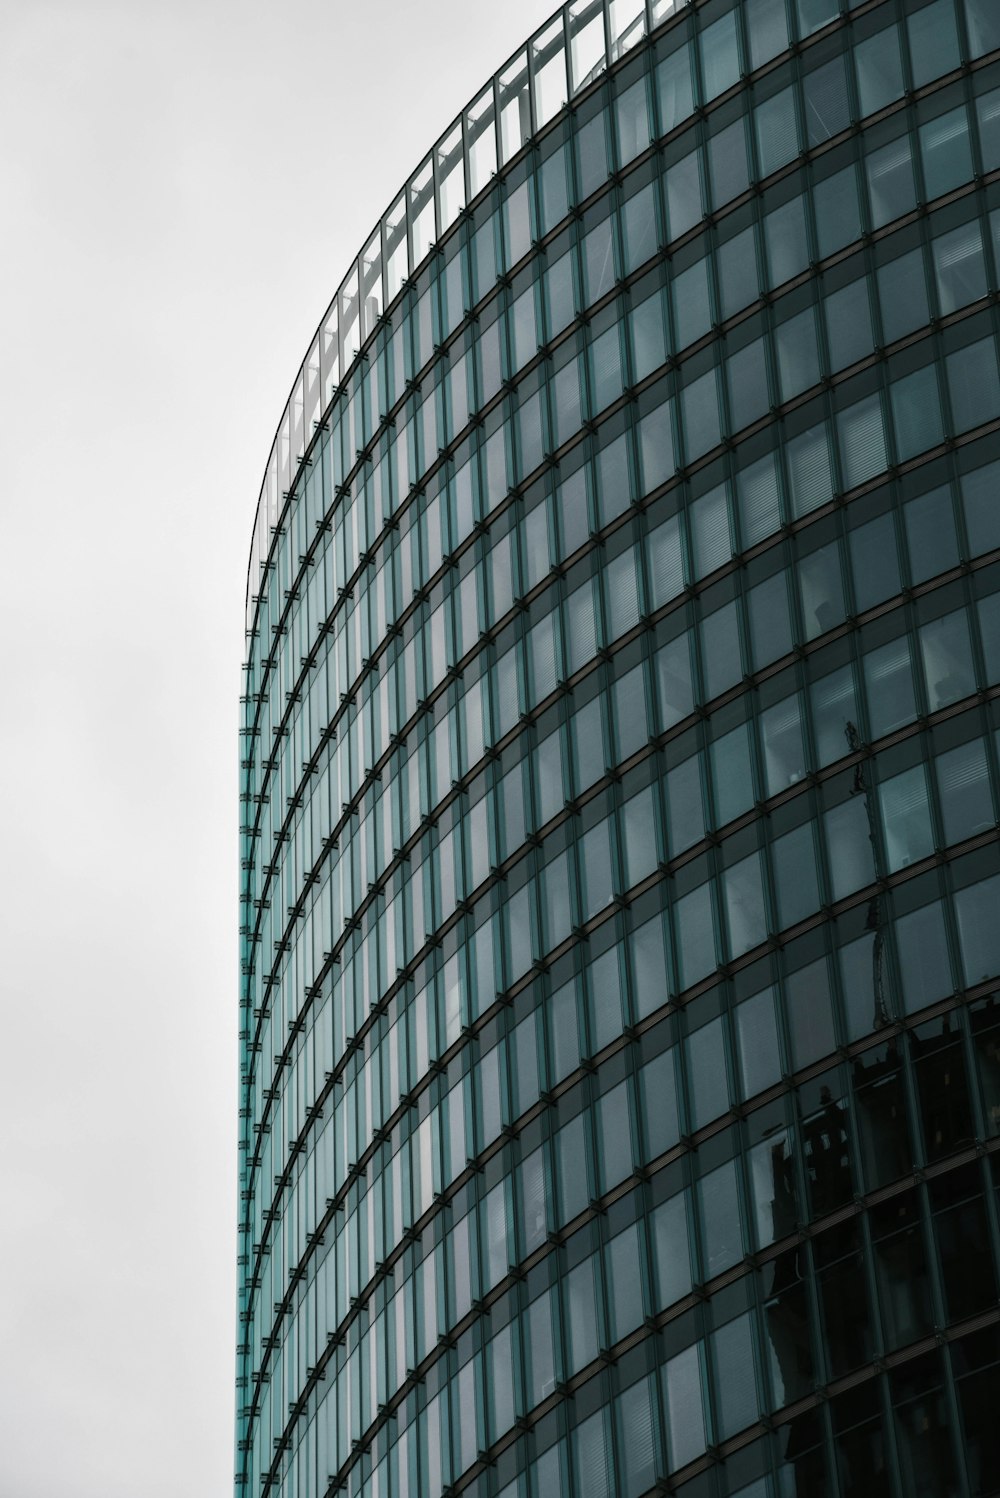 close-up photography of curtain wall building